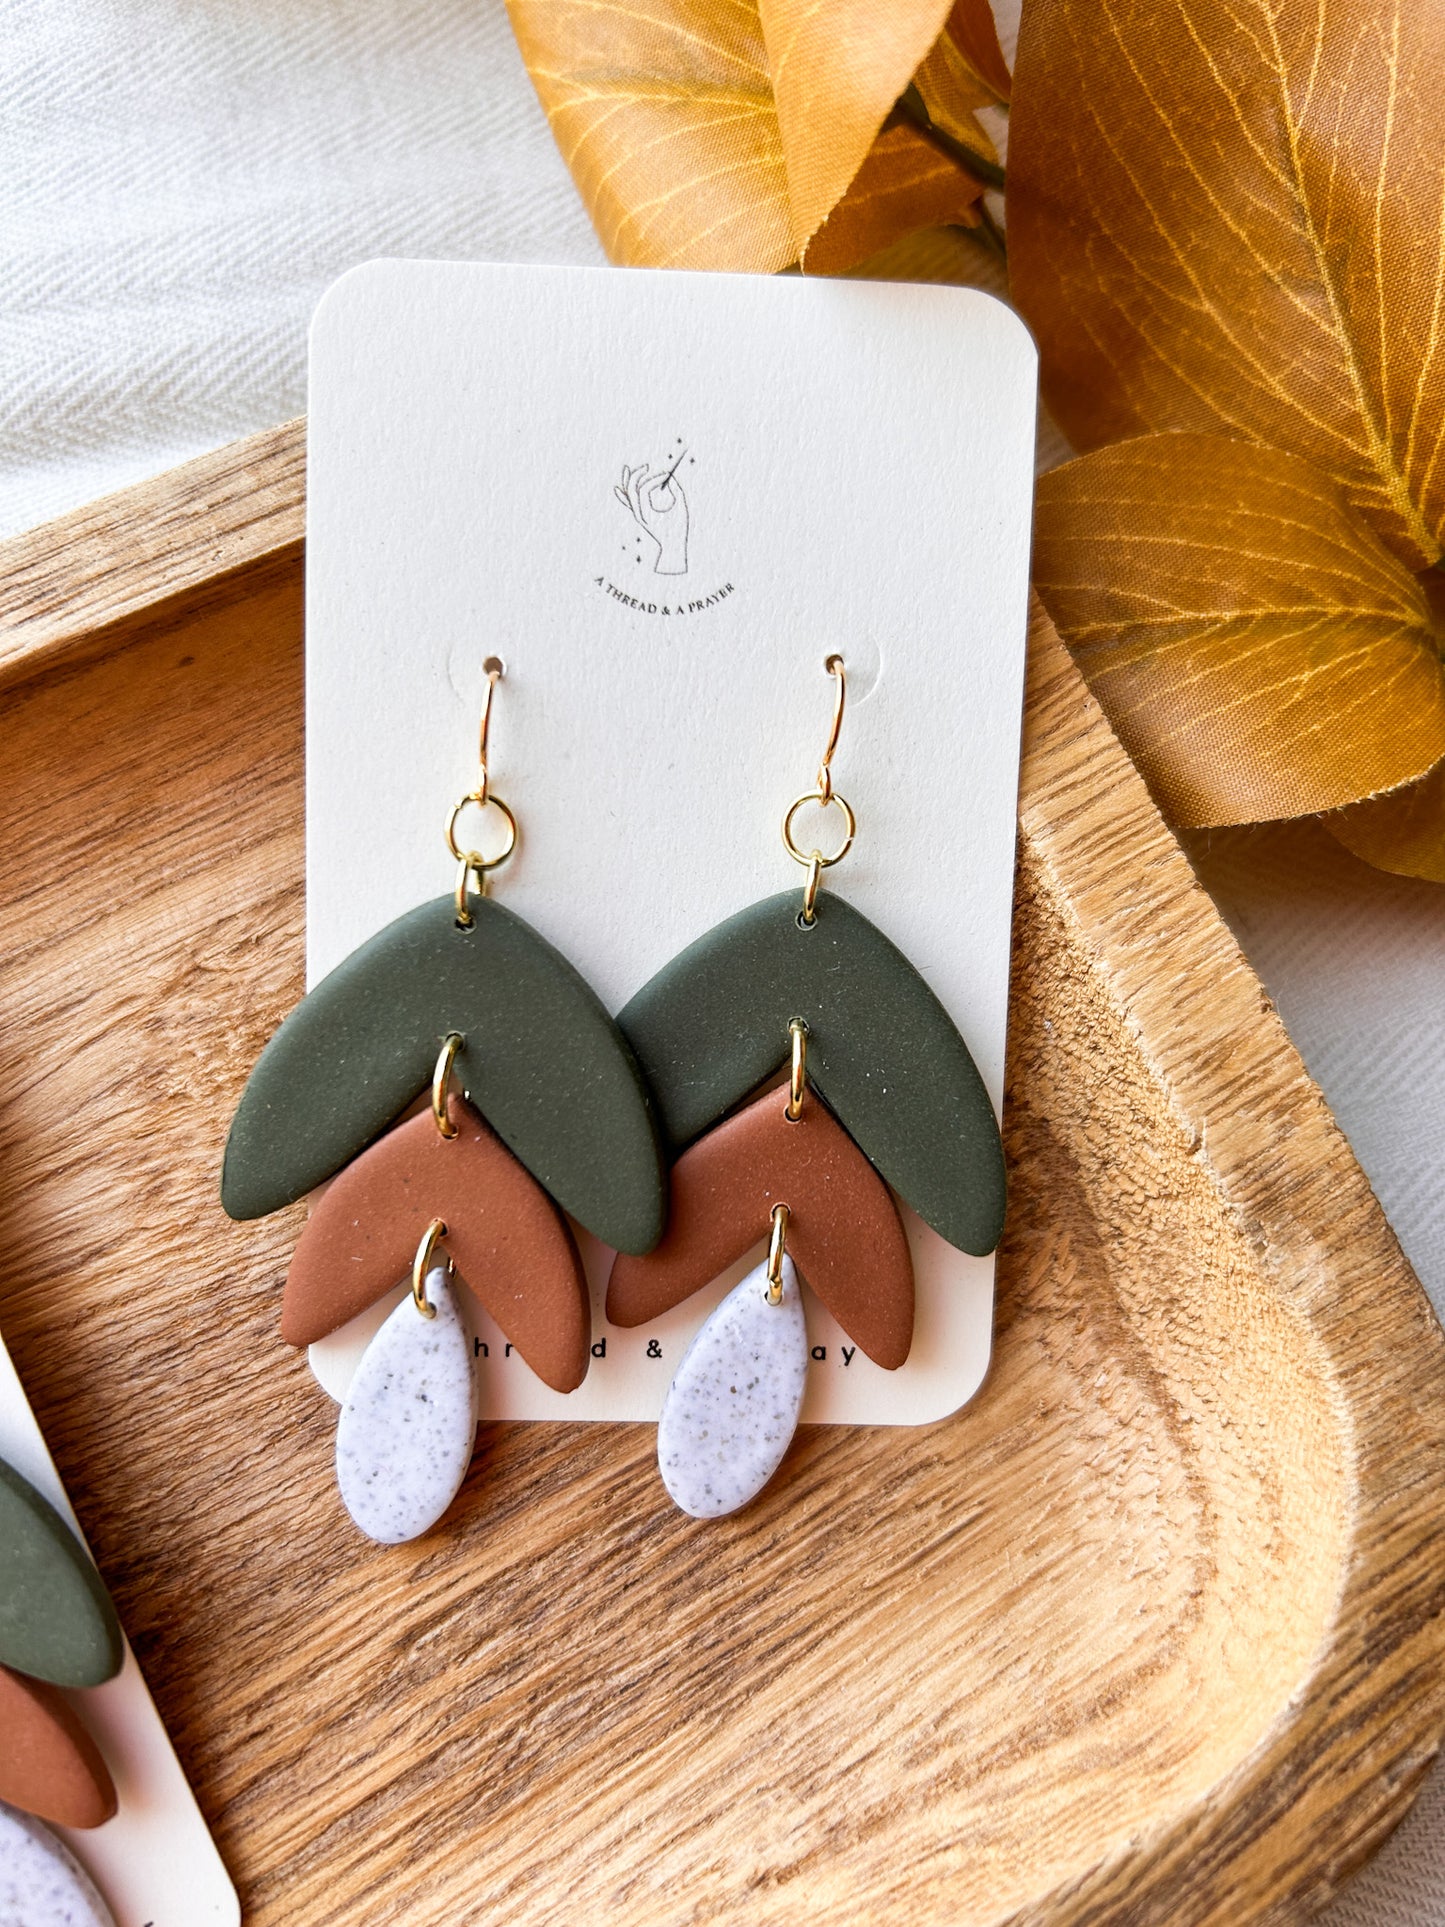 Falling for Autumn Tiered Clay Earrings | Fall Fashion | Autumn Earrings | Statement Earrings | Lightweight